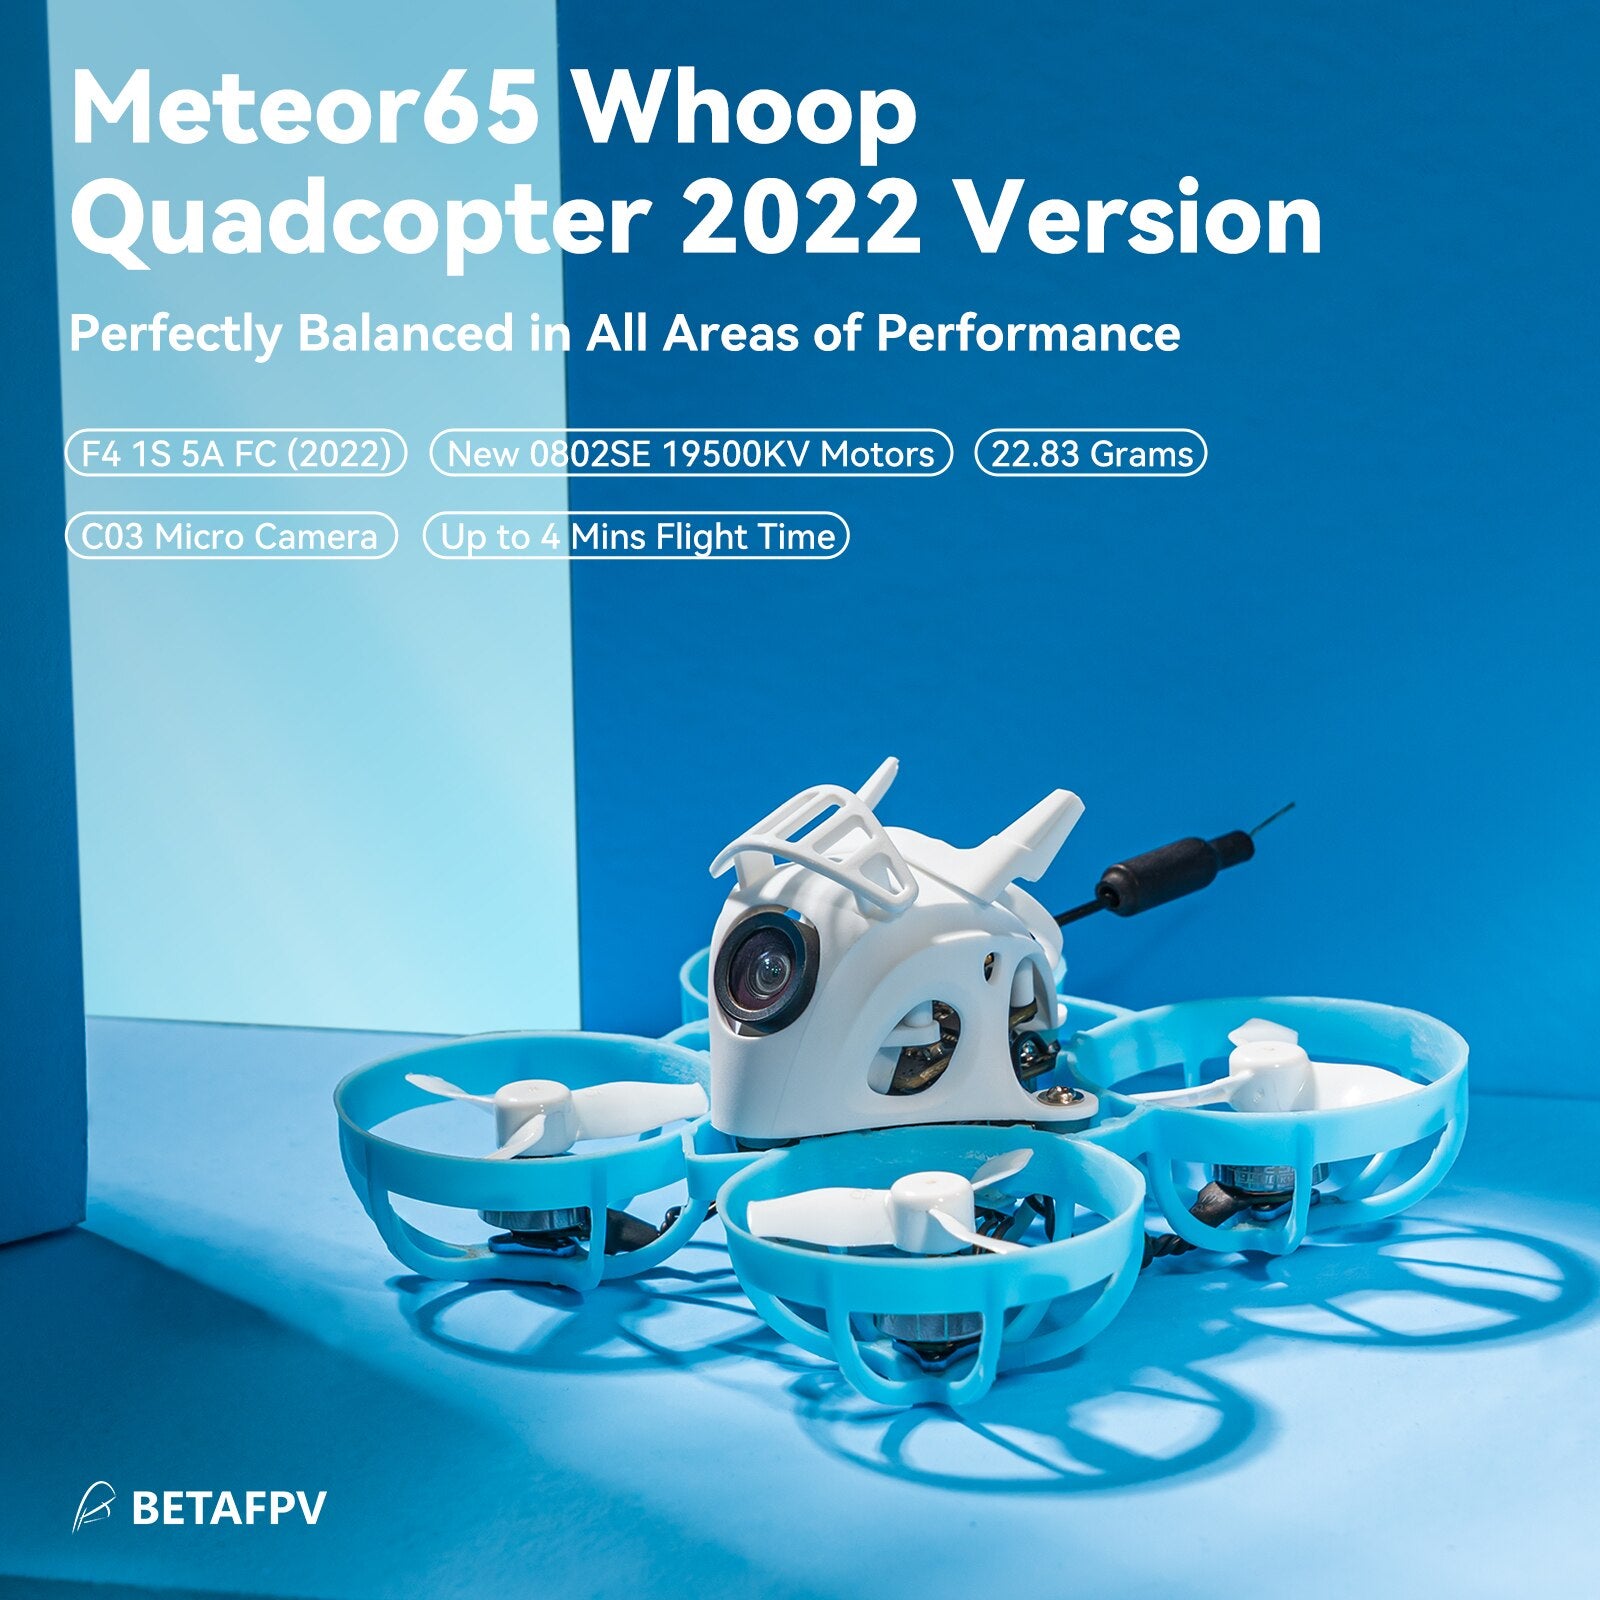 BETAFPV Meteor65 2022 Version, Meteor65 Whoop Quadcopter 2022 Version Perfectly Balanced in All